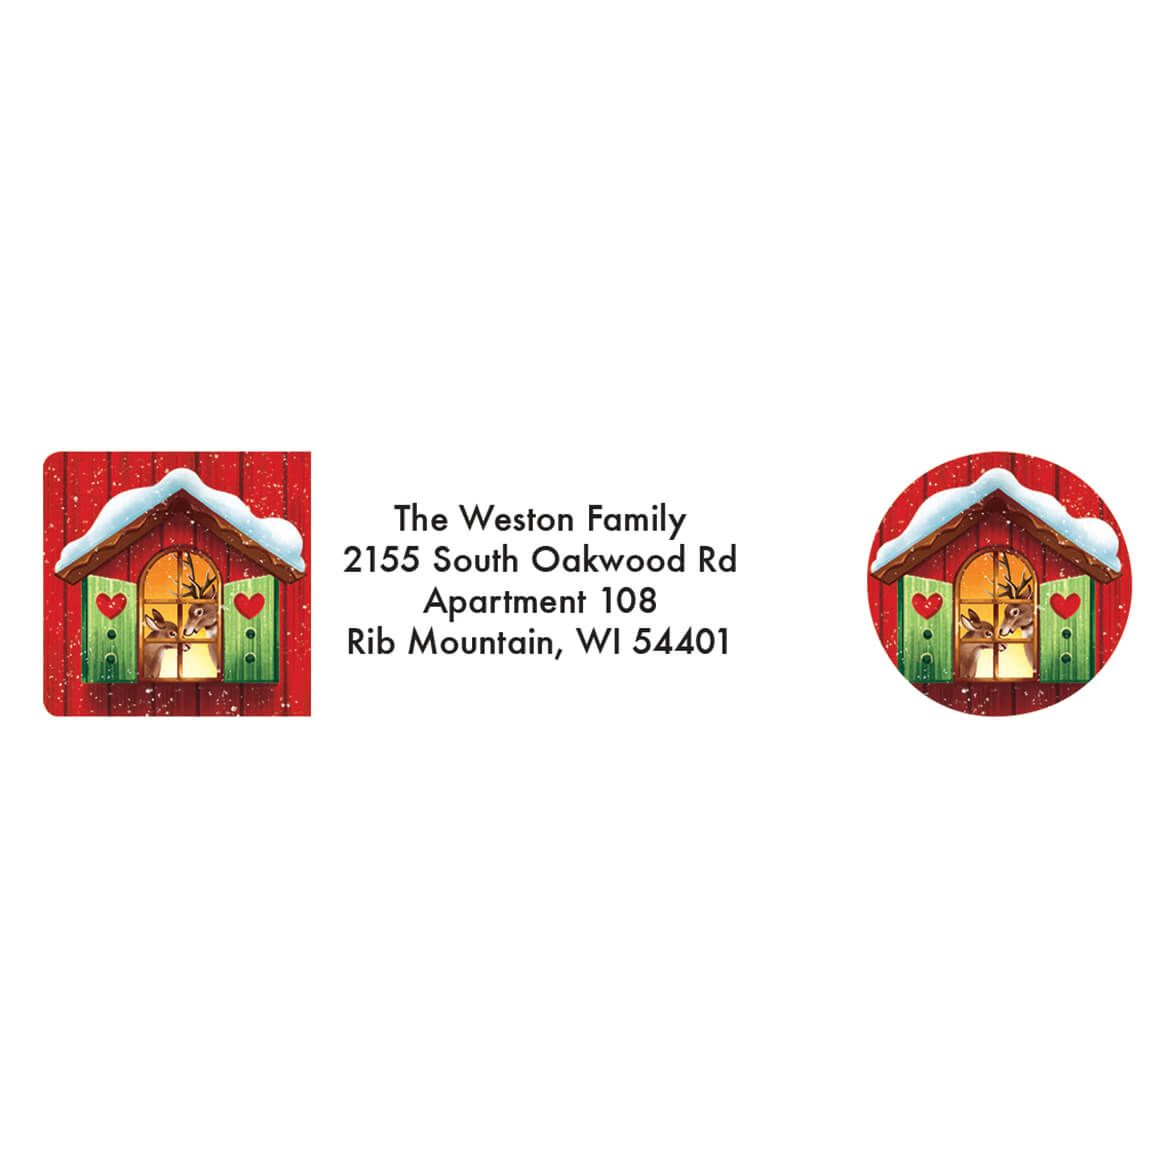 Personalized Our Years Together Address Labels & Seals 20 + '-' + 364749